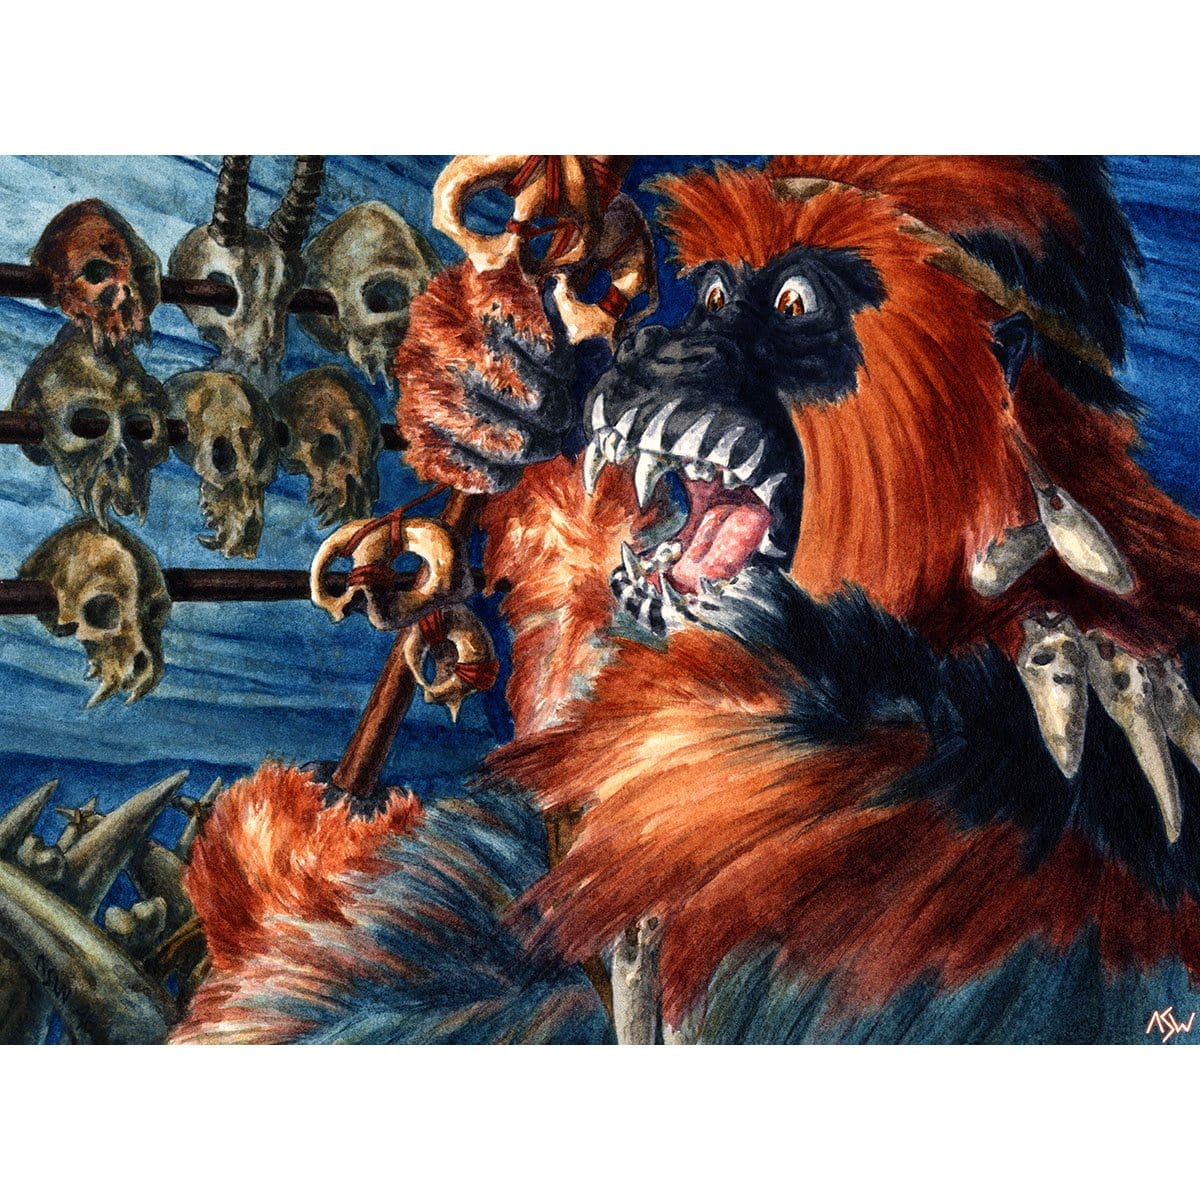 Gorilla Shaman Print - Print - Original Magic Art - Accessories for Magic the Gathering and other card games